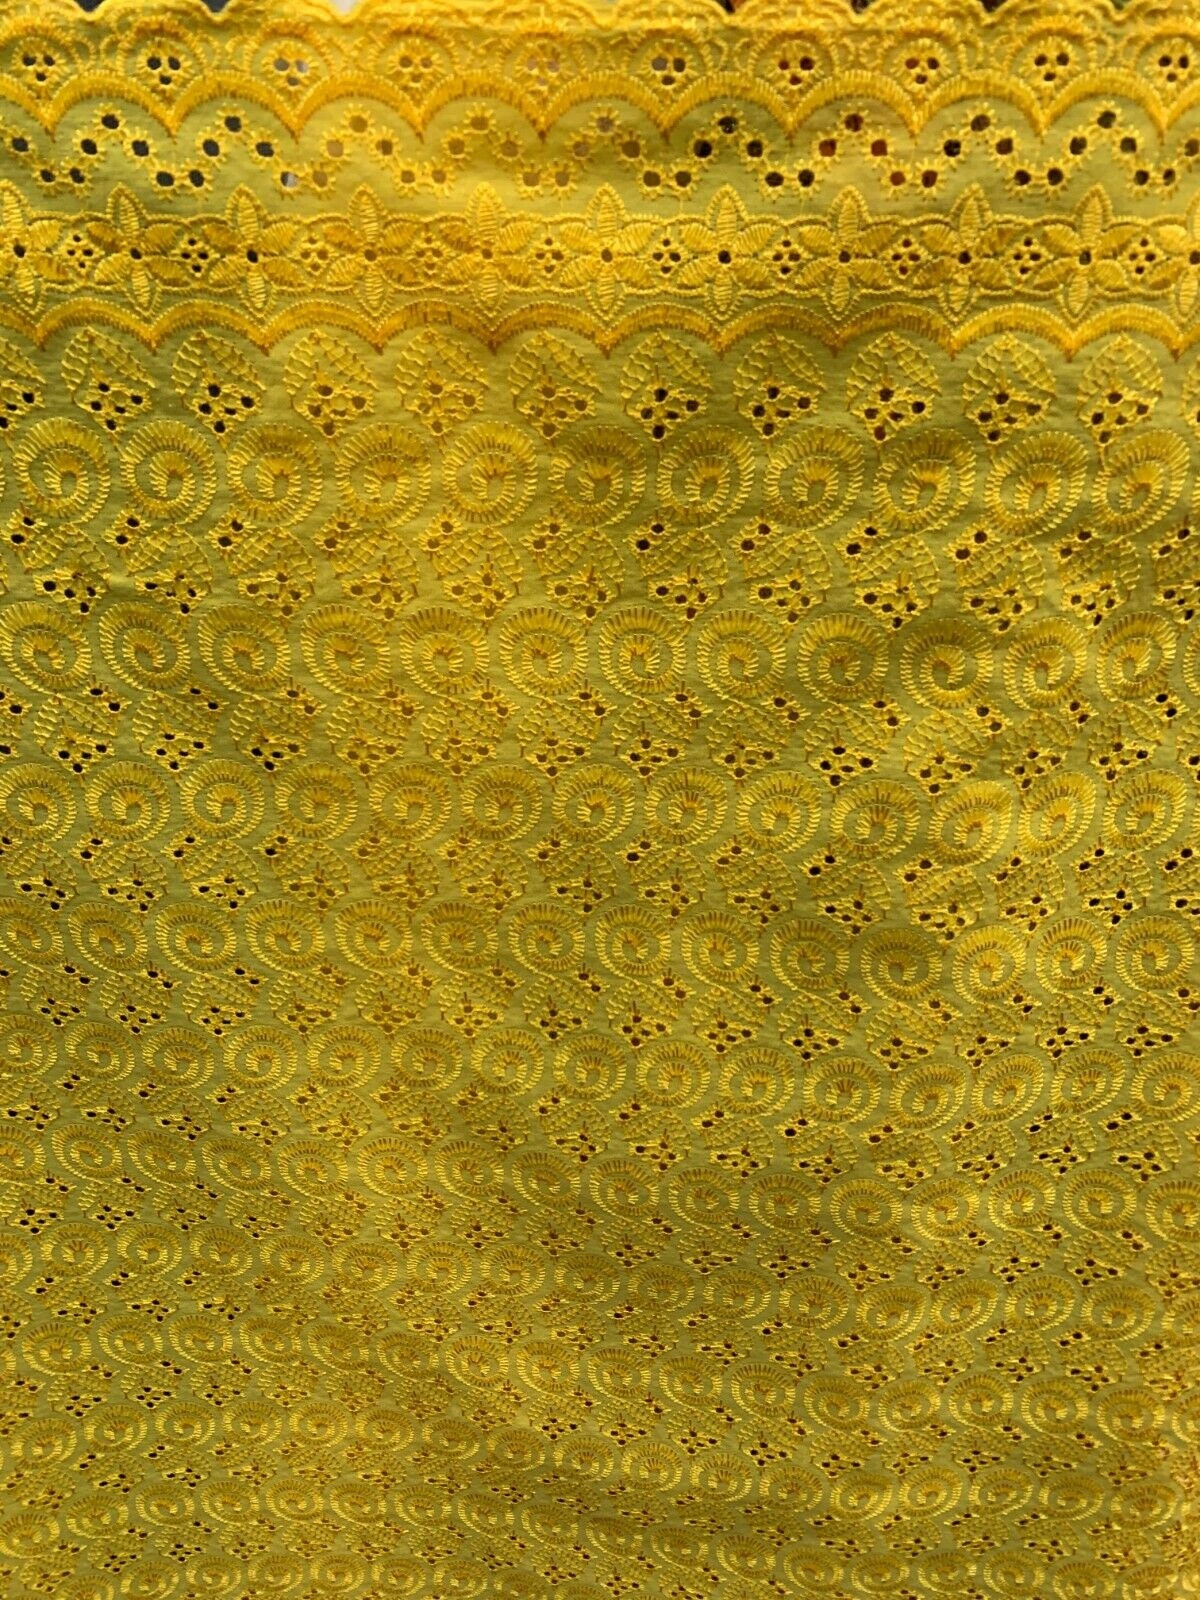 GOLDEN YELLOW Floral Cotton Eyelet Embroidered Fabric (45 in.) Sold By The Yard